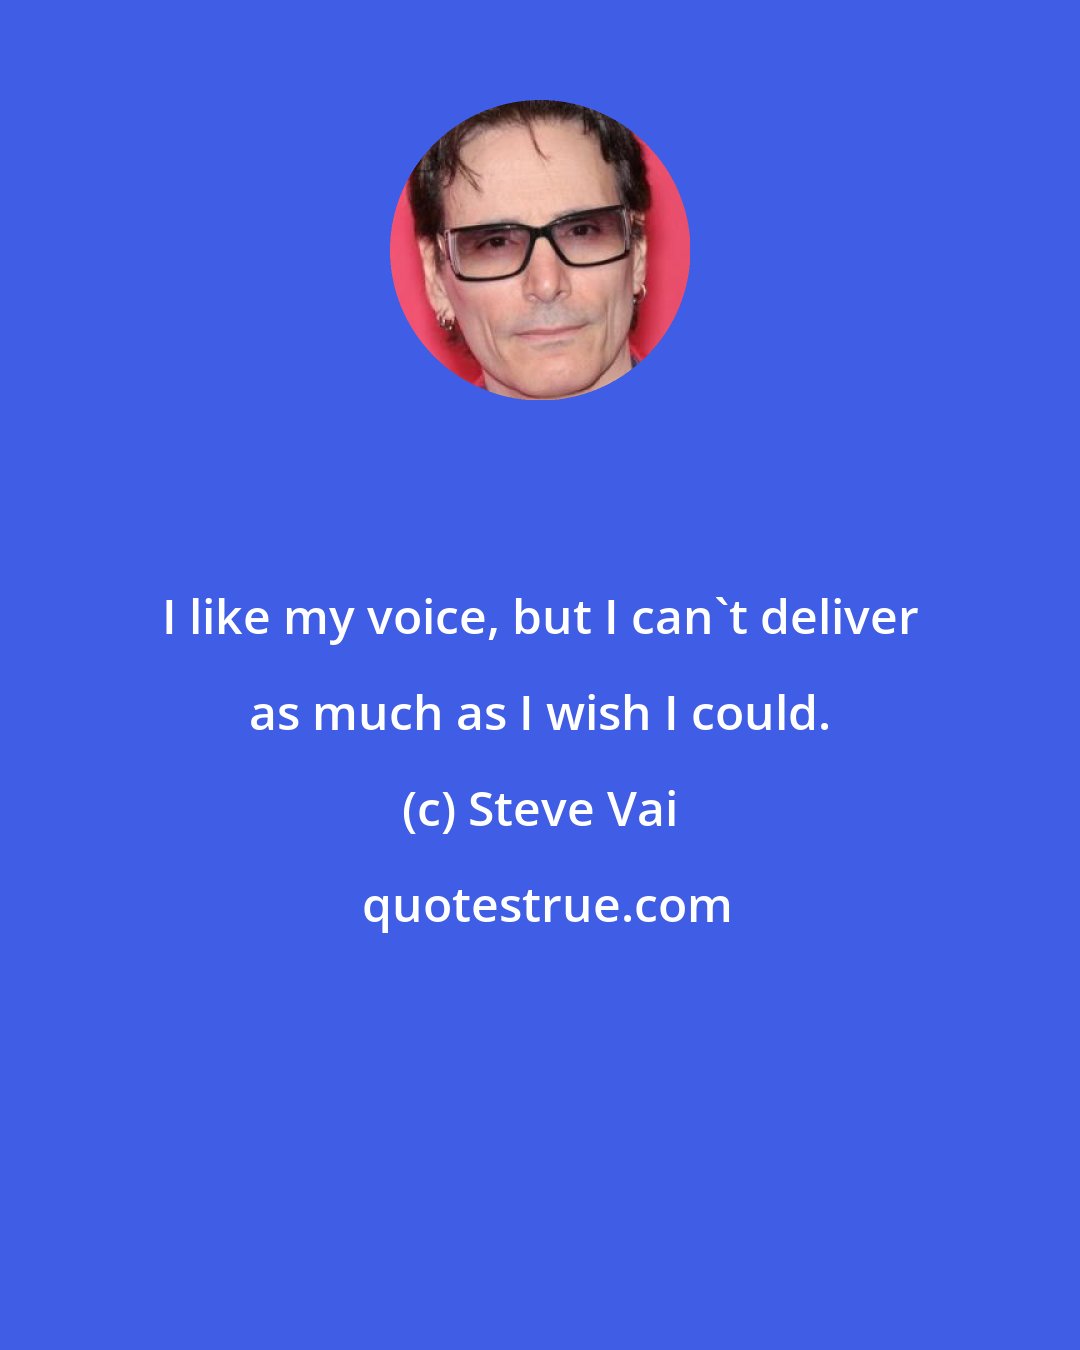 Steve Vai: I like my voice, but I can't deliver as much as I wish I could.